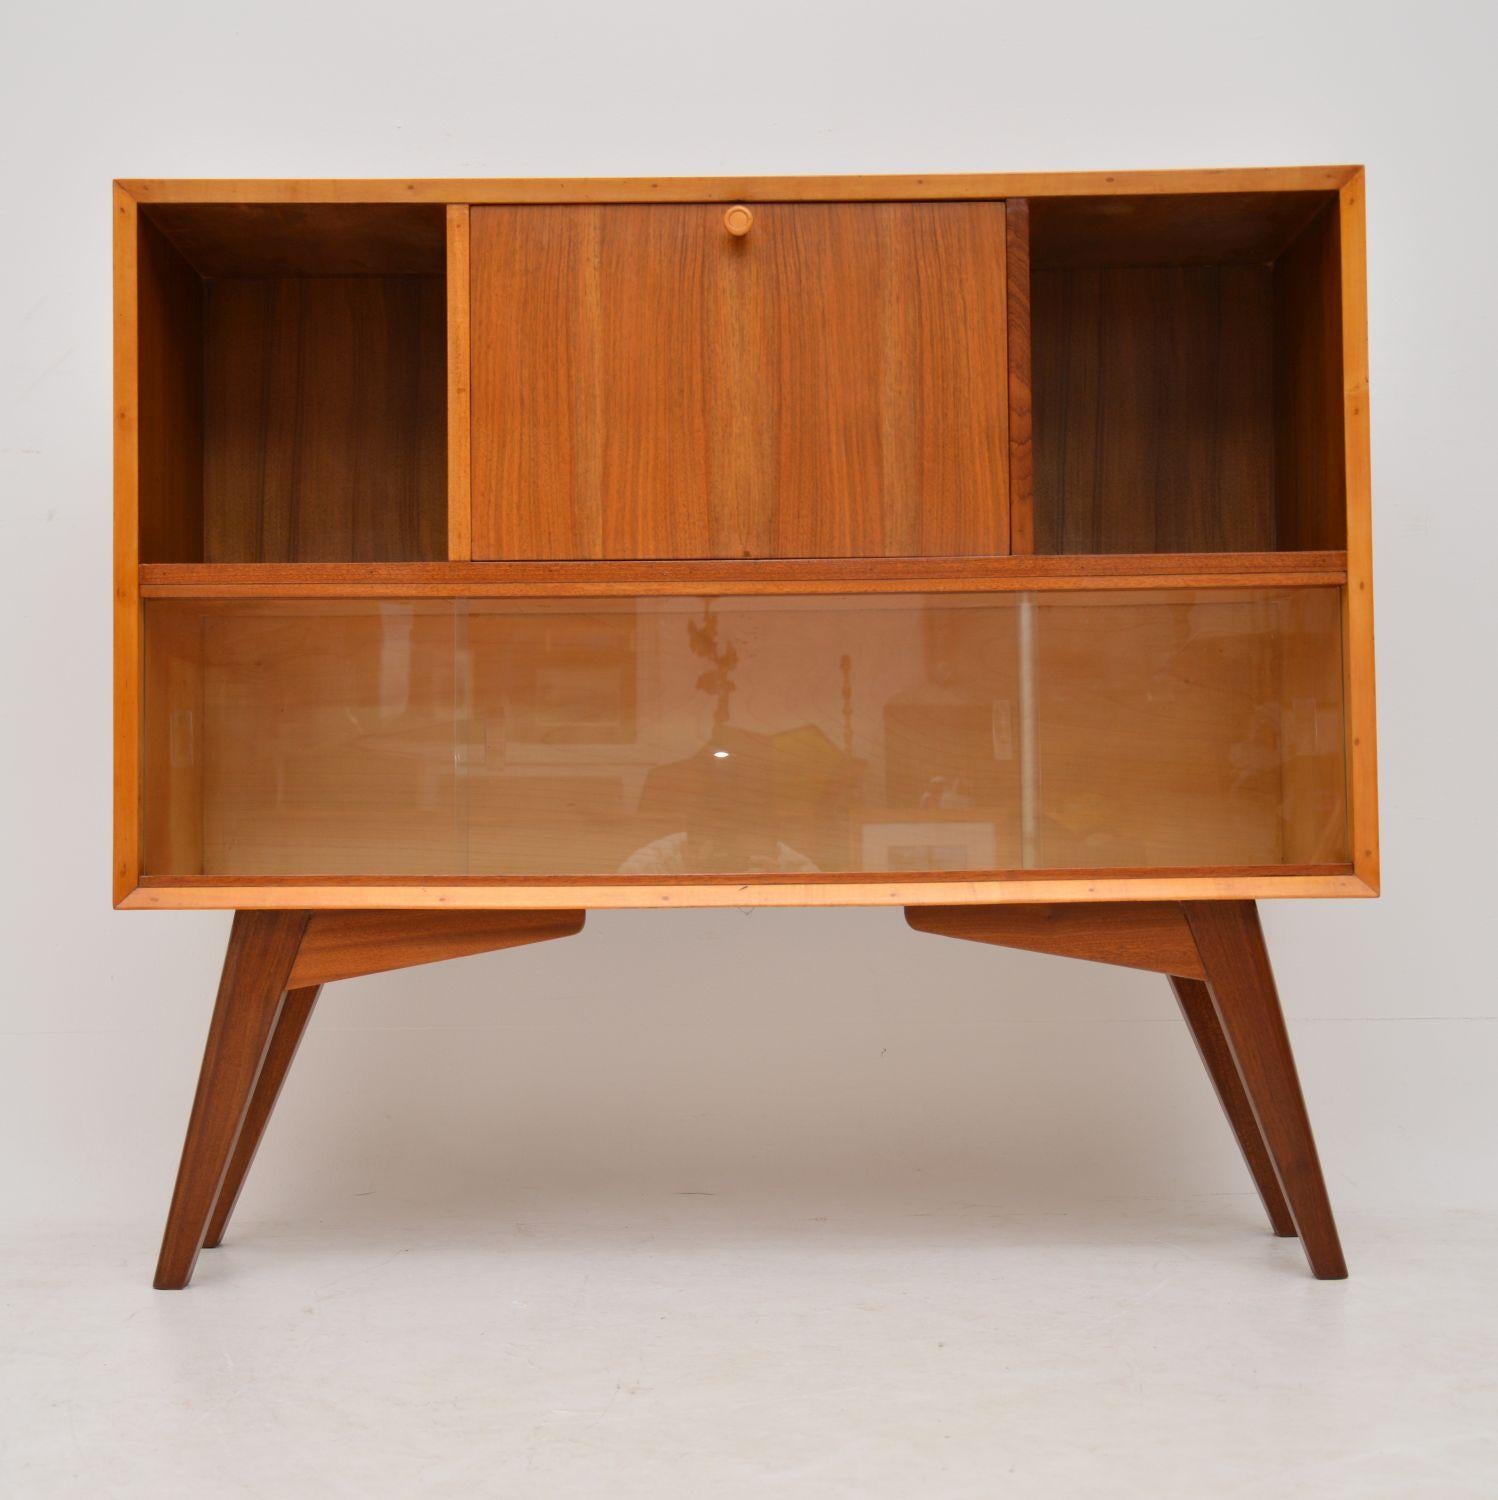 A beautifully made and unusual vintage cabinet in walnut, this dates from the 1950s. It is multi functional, with a built in pull down writing bureau section and bookcase compartments, this would also function well as a tv unit. We have had this